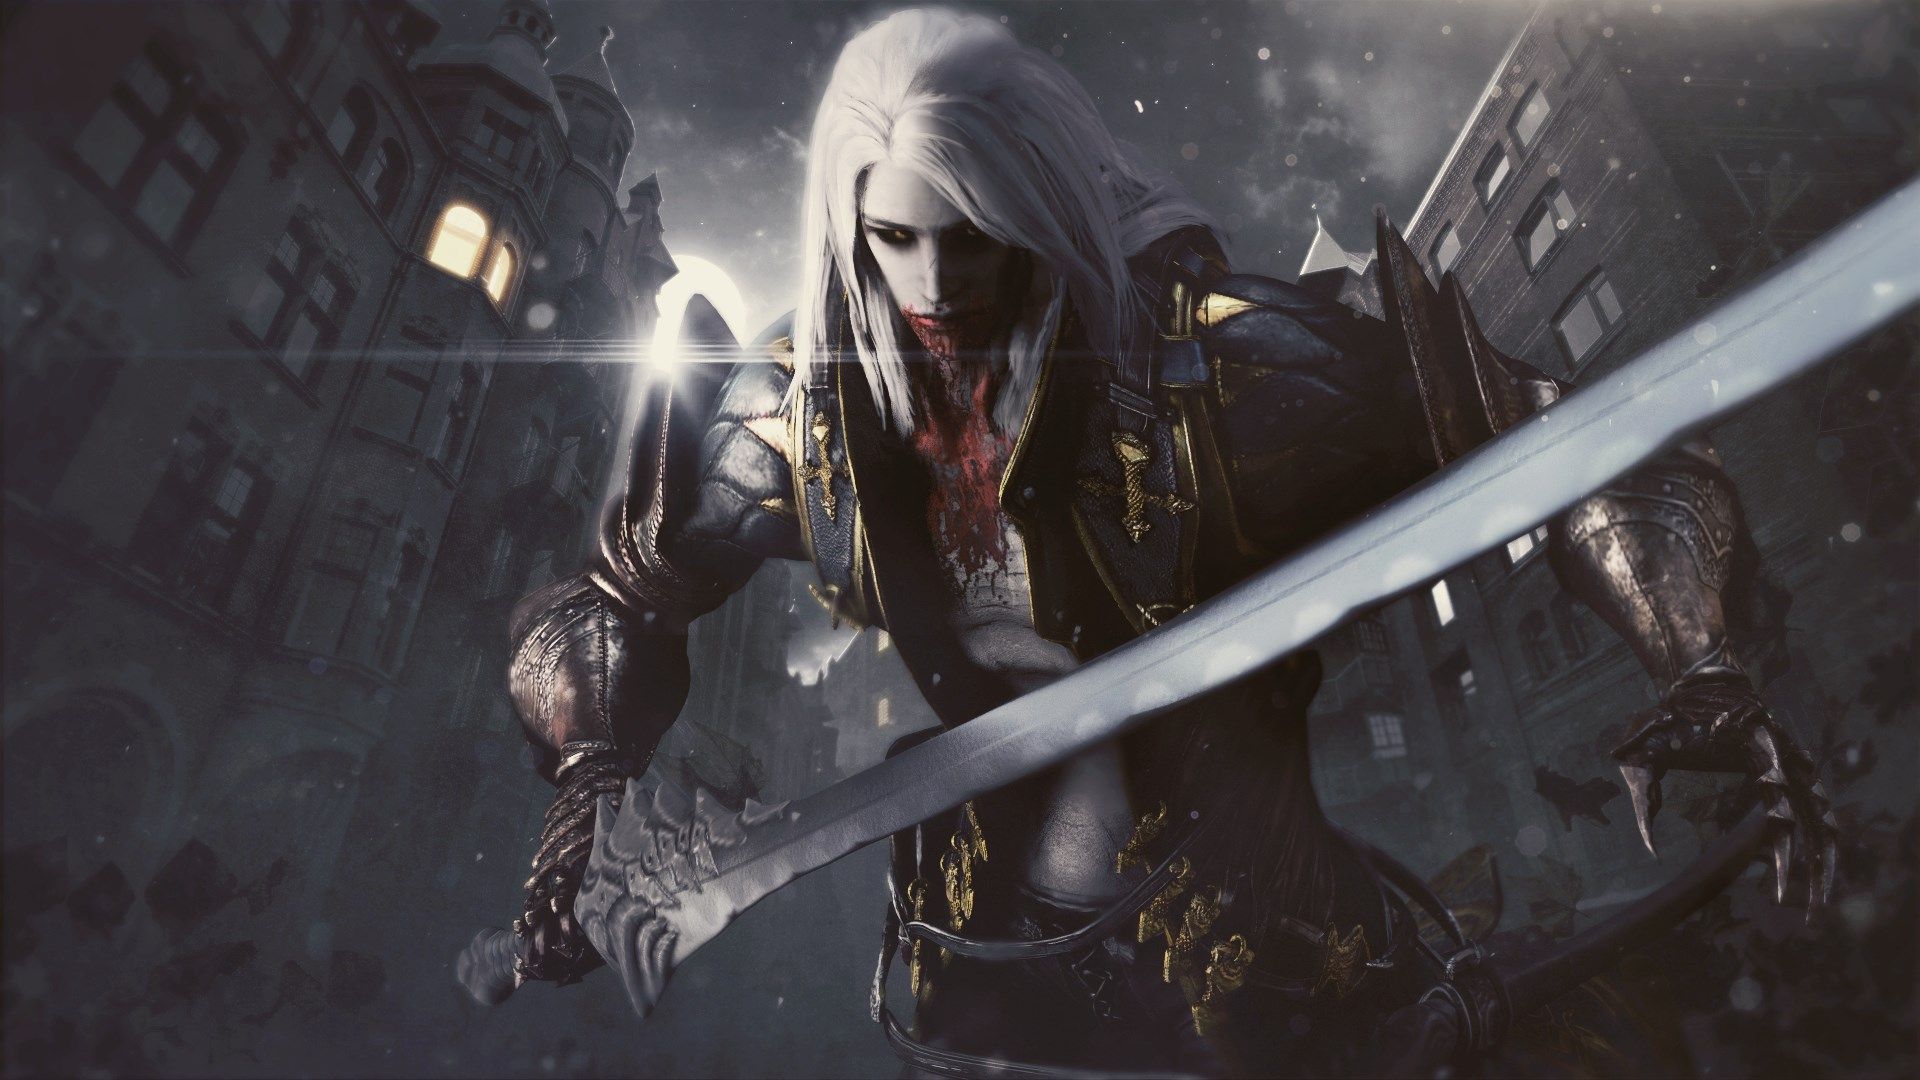 free computer wallpaper for castlevania lords of shadow. Castlevania lord of shadow, Alucard castlevania, Lord of shadows